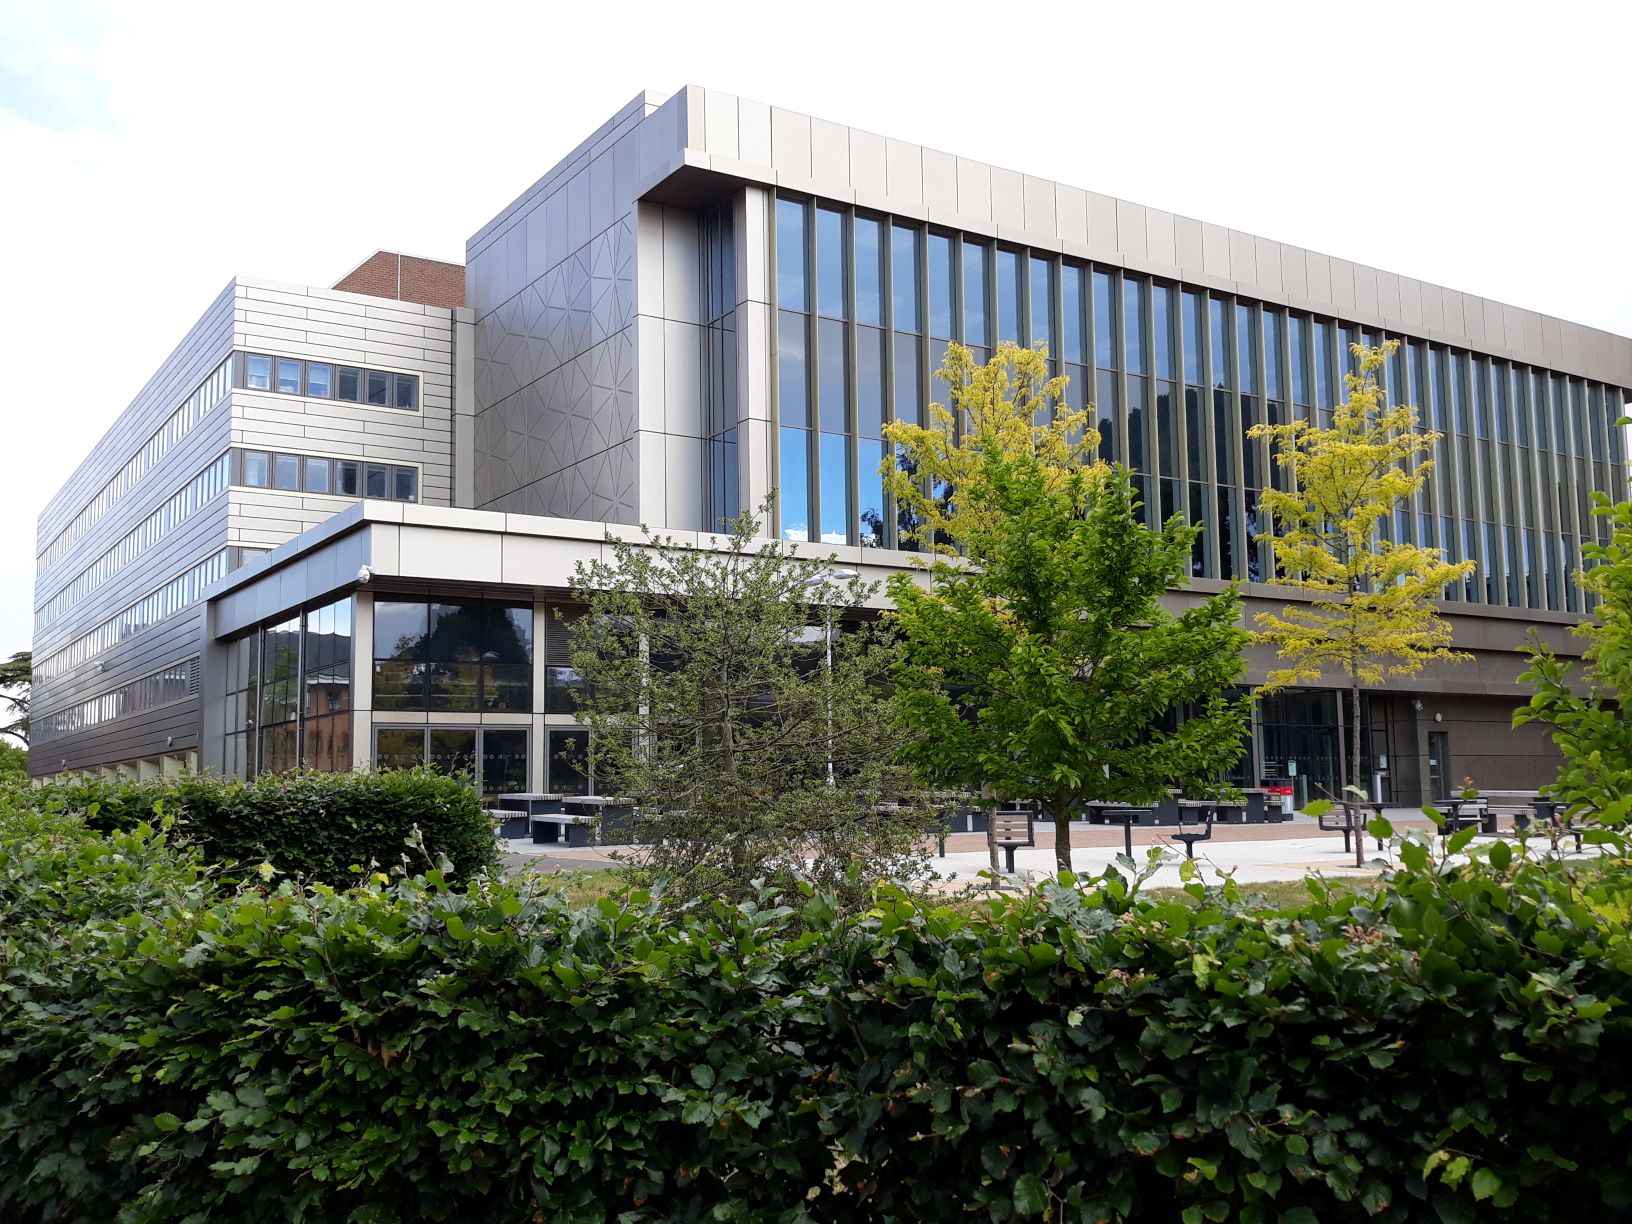 Image of the University Library. It is a large, modern building, recently refurbished. It is grey, with many windows. In front of it is green space with trees.